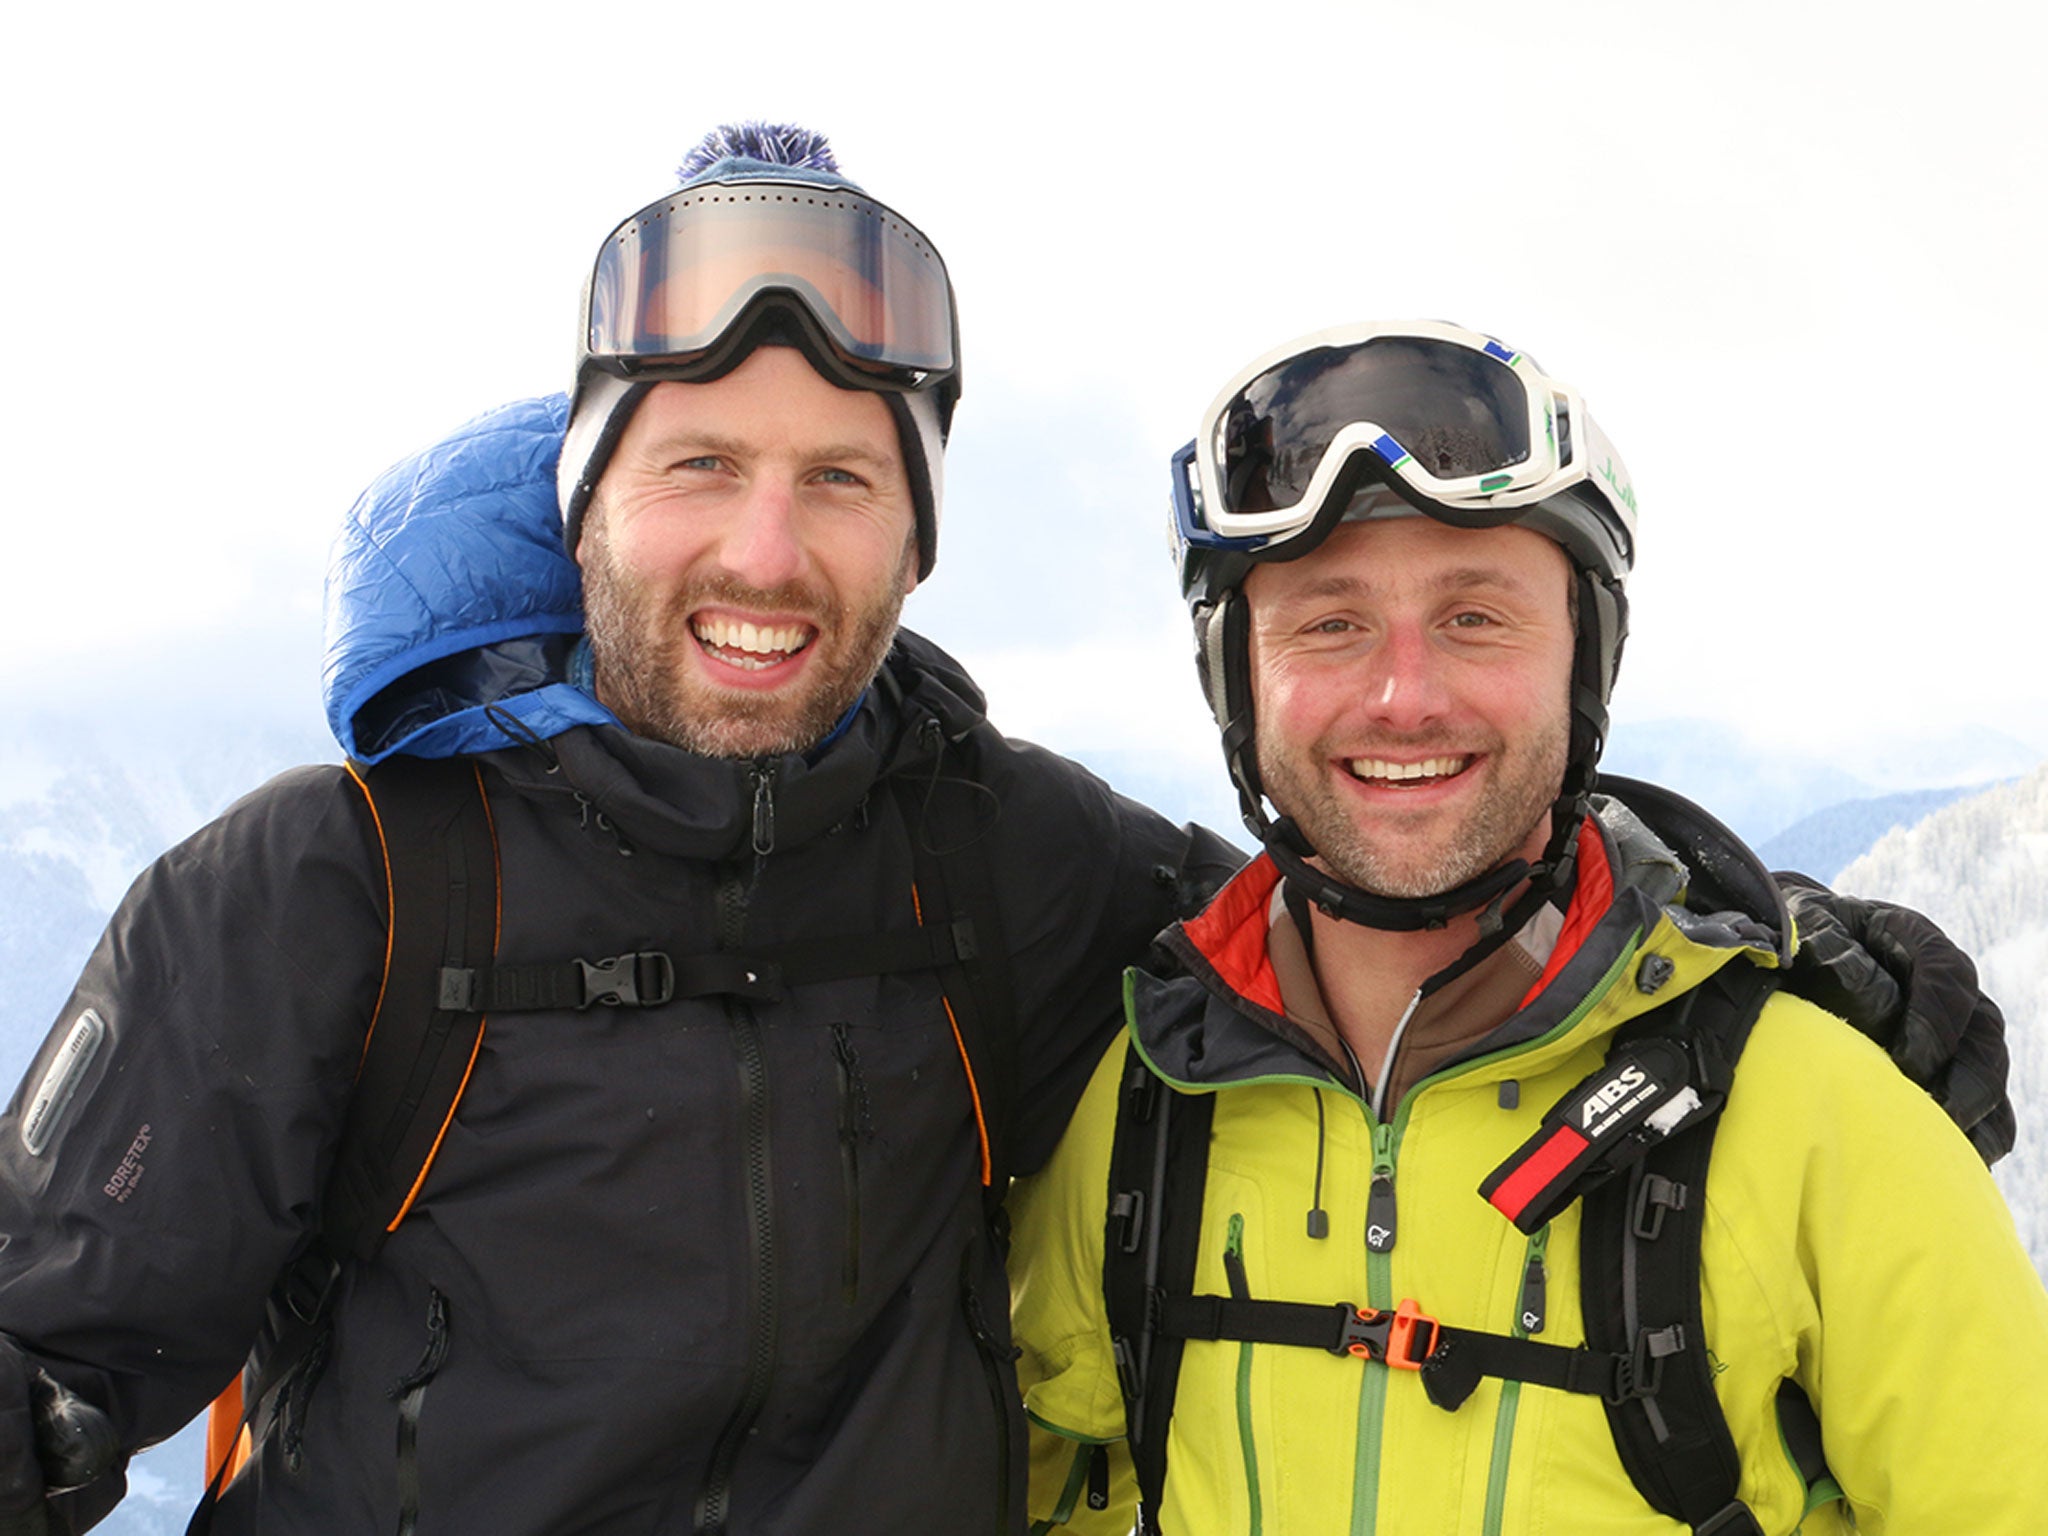 Simon and Patrick on their most recent trip to Verbier